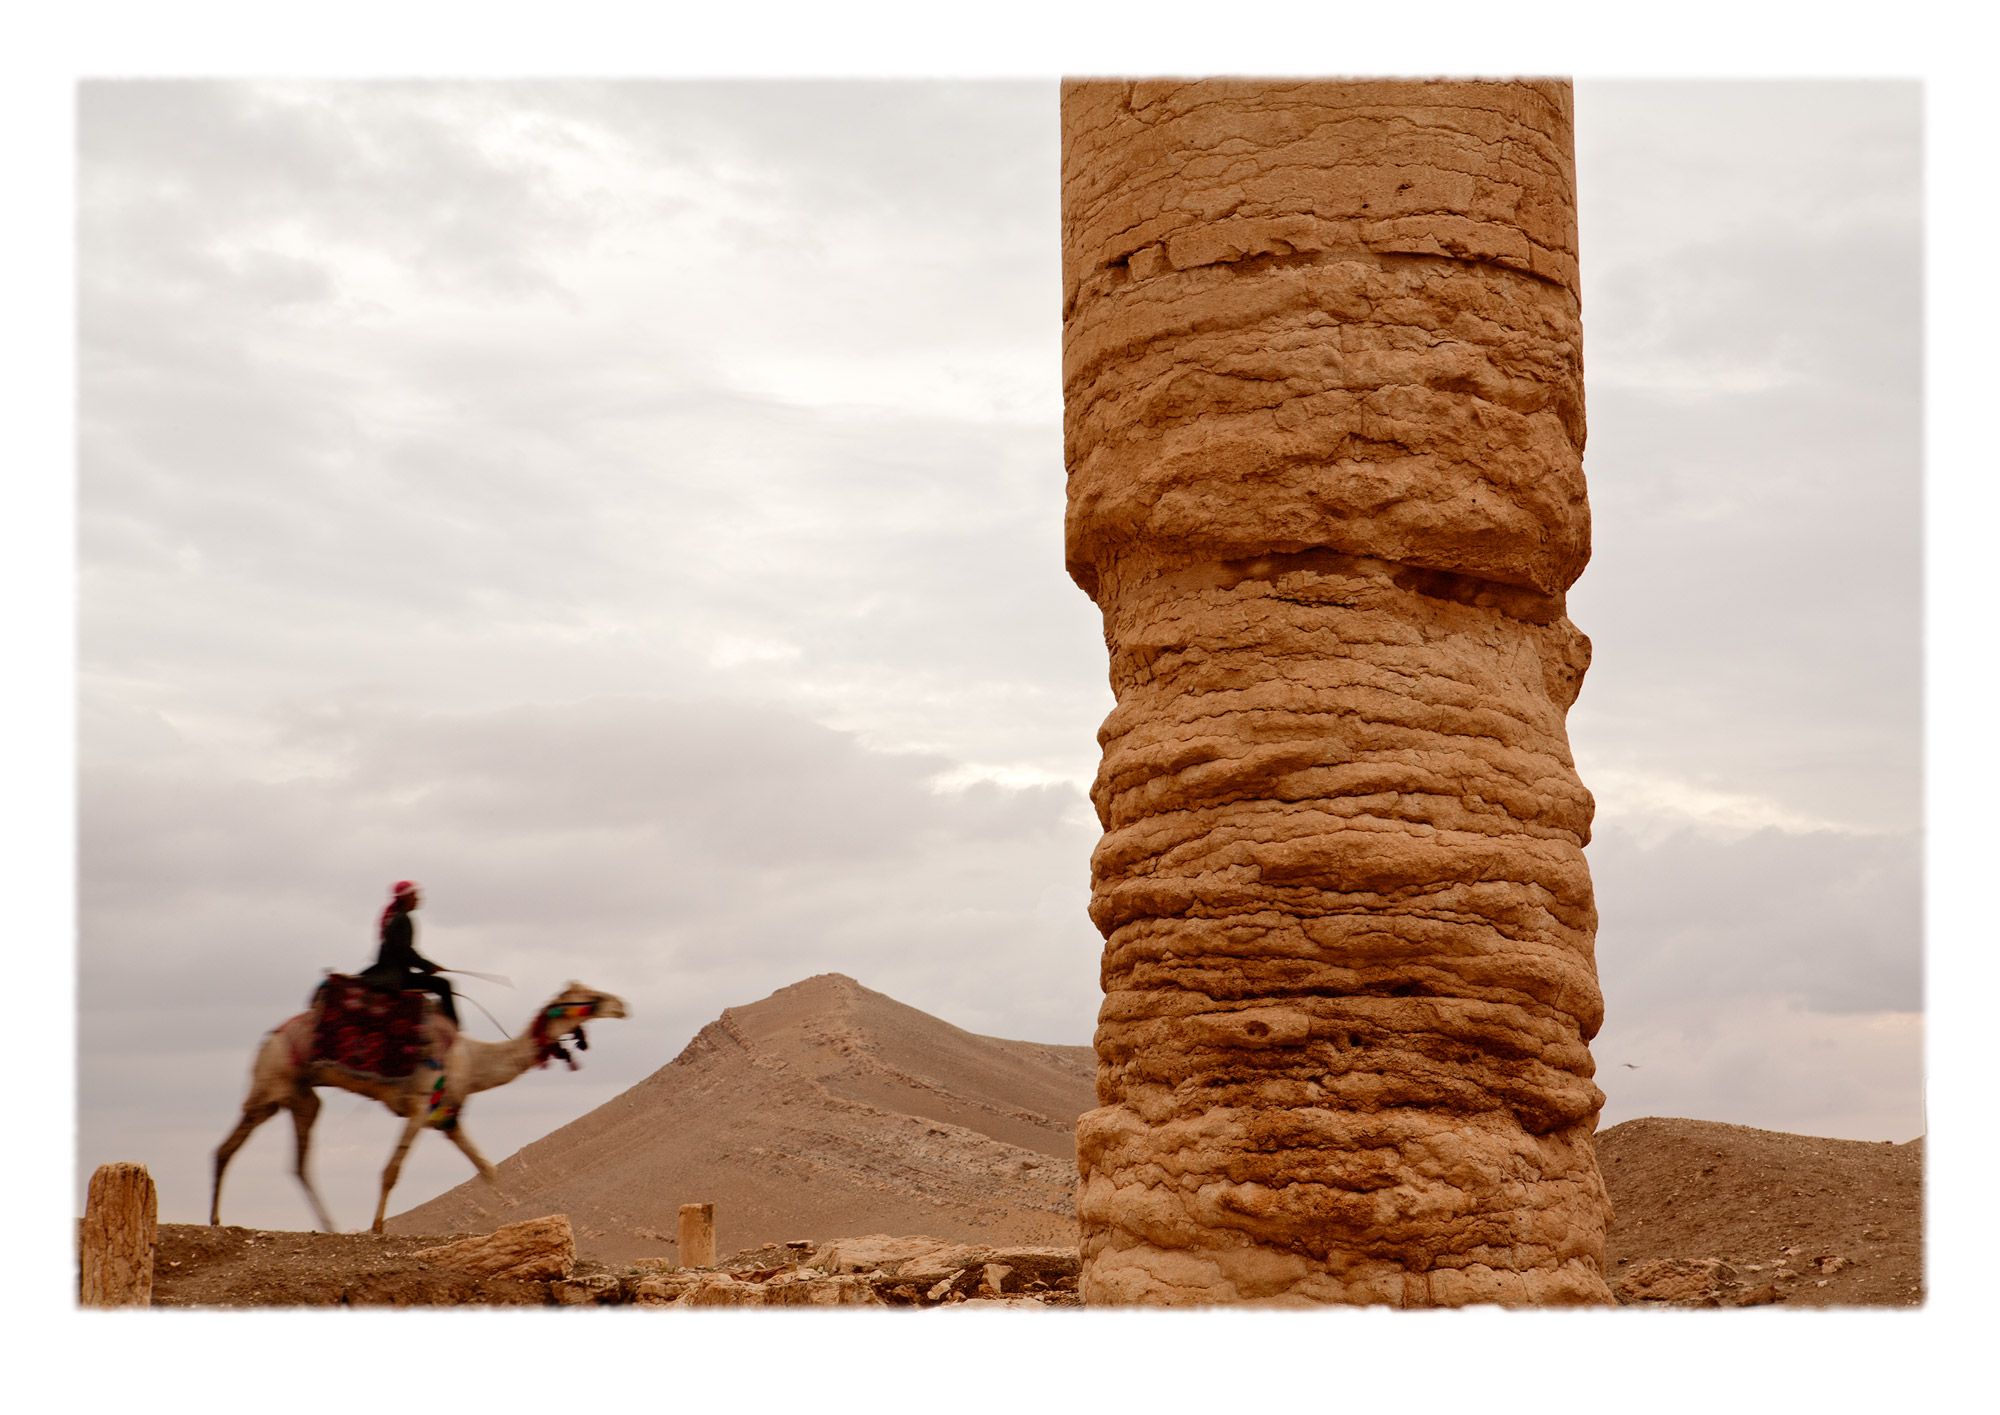 Dessicated windblown sandblasted and expressively eroded column behind which a man rides a colorfully bedecked camel. The tones and textures of erosion on once glorious specimens of  artisanal production are eloquent testaments to the relative nature of evanescence.